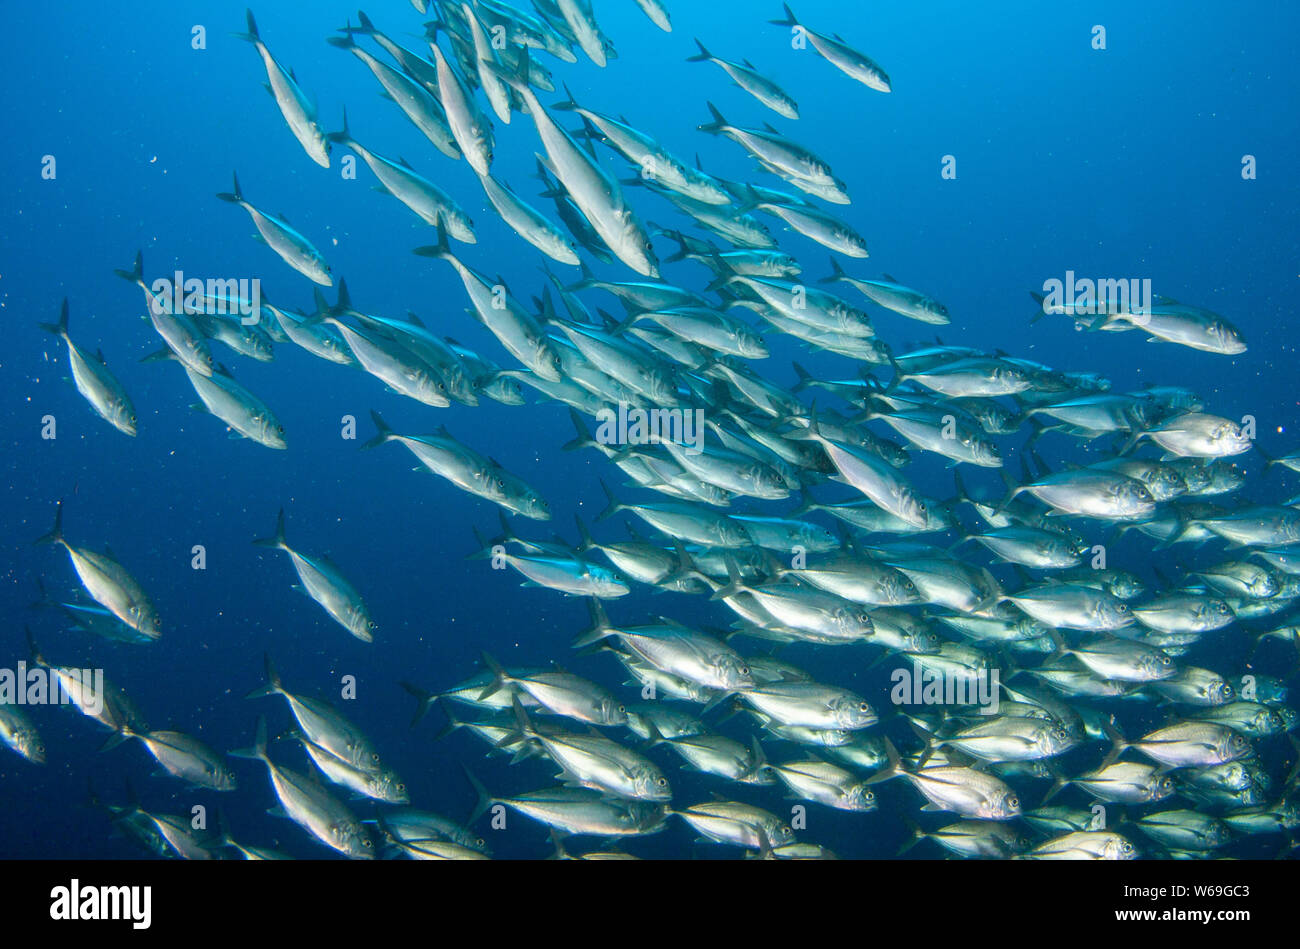 Concept image of overfishing,depletion of fish stocks in the Oceans Stock Photo